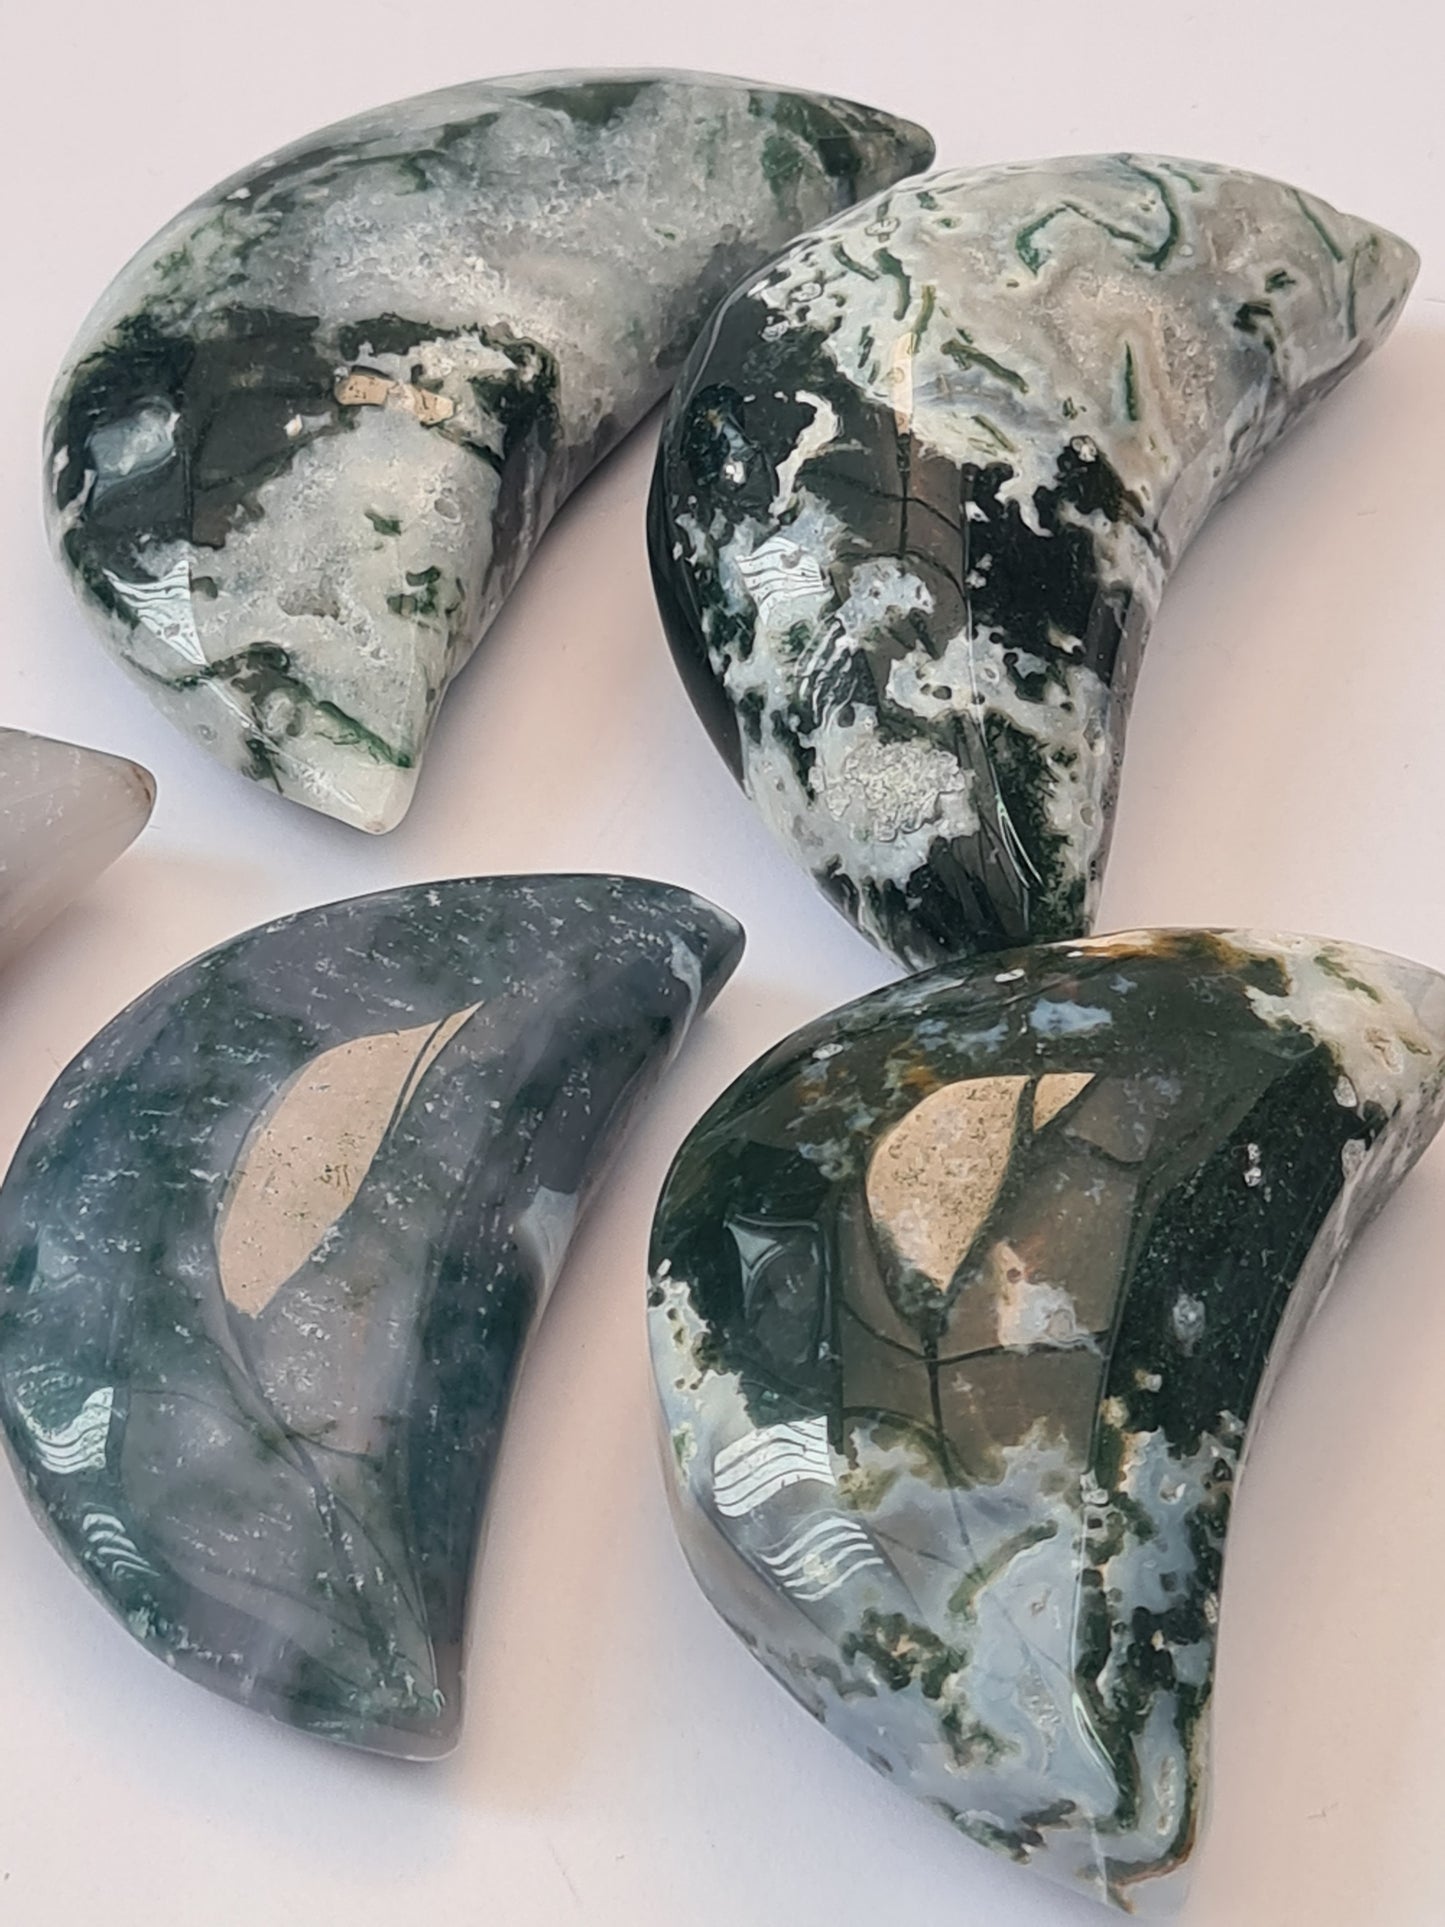 Moss Agate Crescent Moon Carvings. Green with blue and white chalcedony